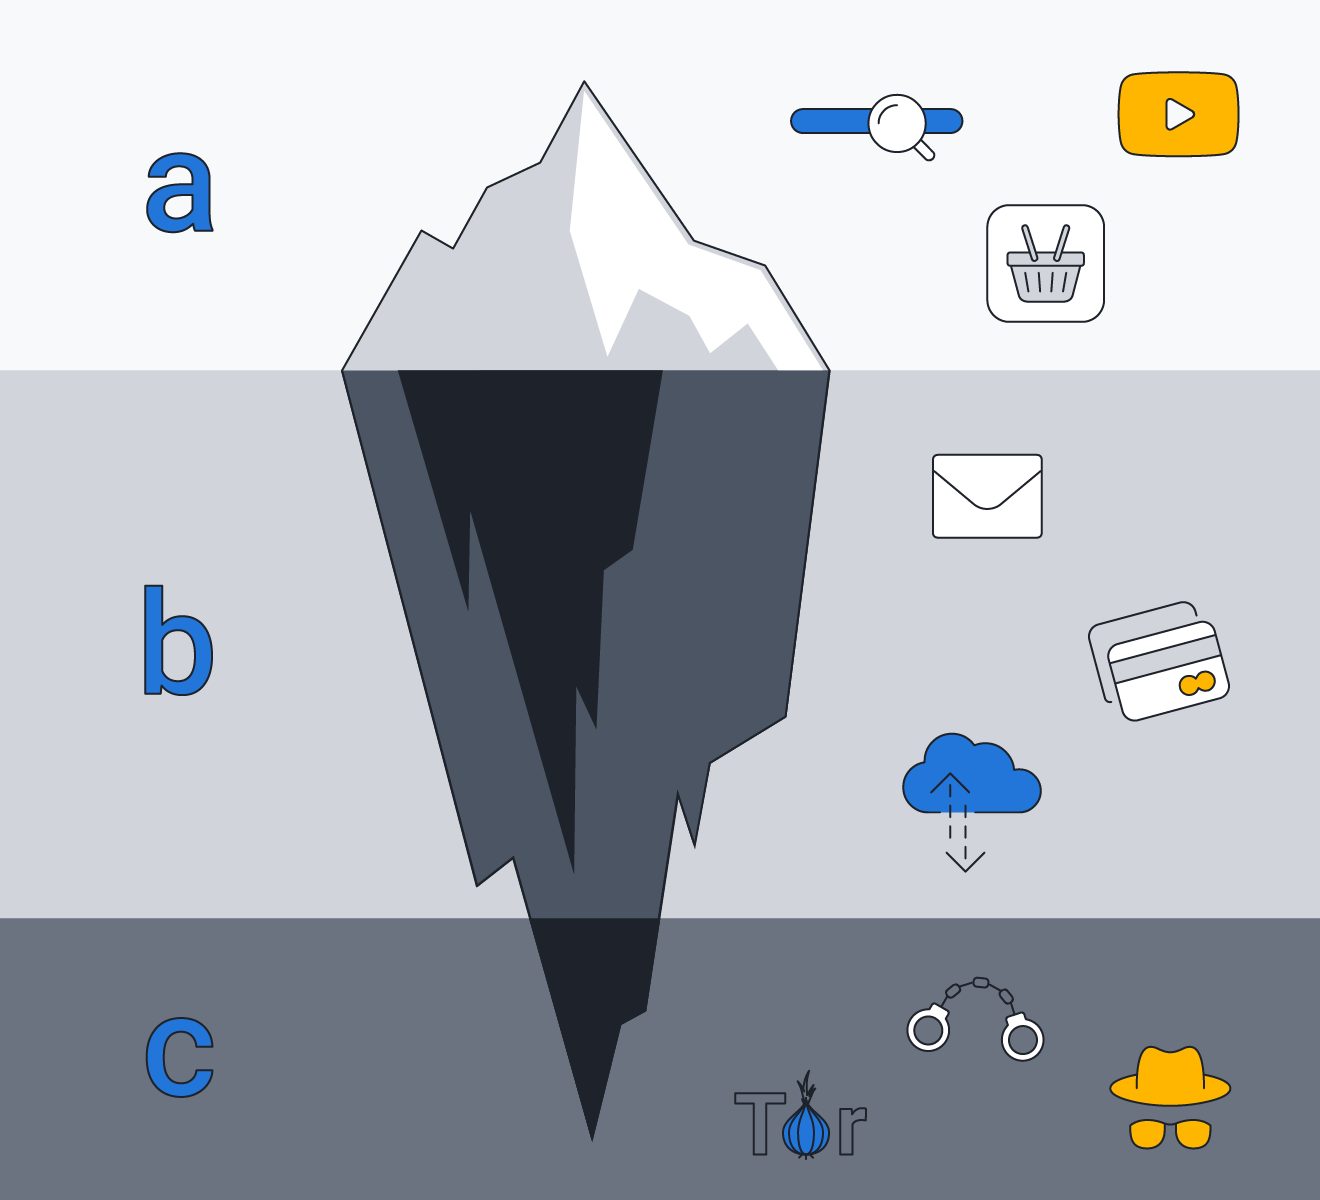 An iceberg illustration represents the differences between surface web, deep web, and dark web.